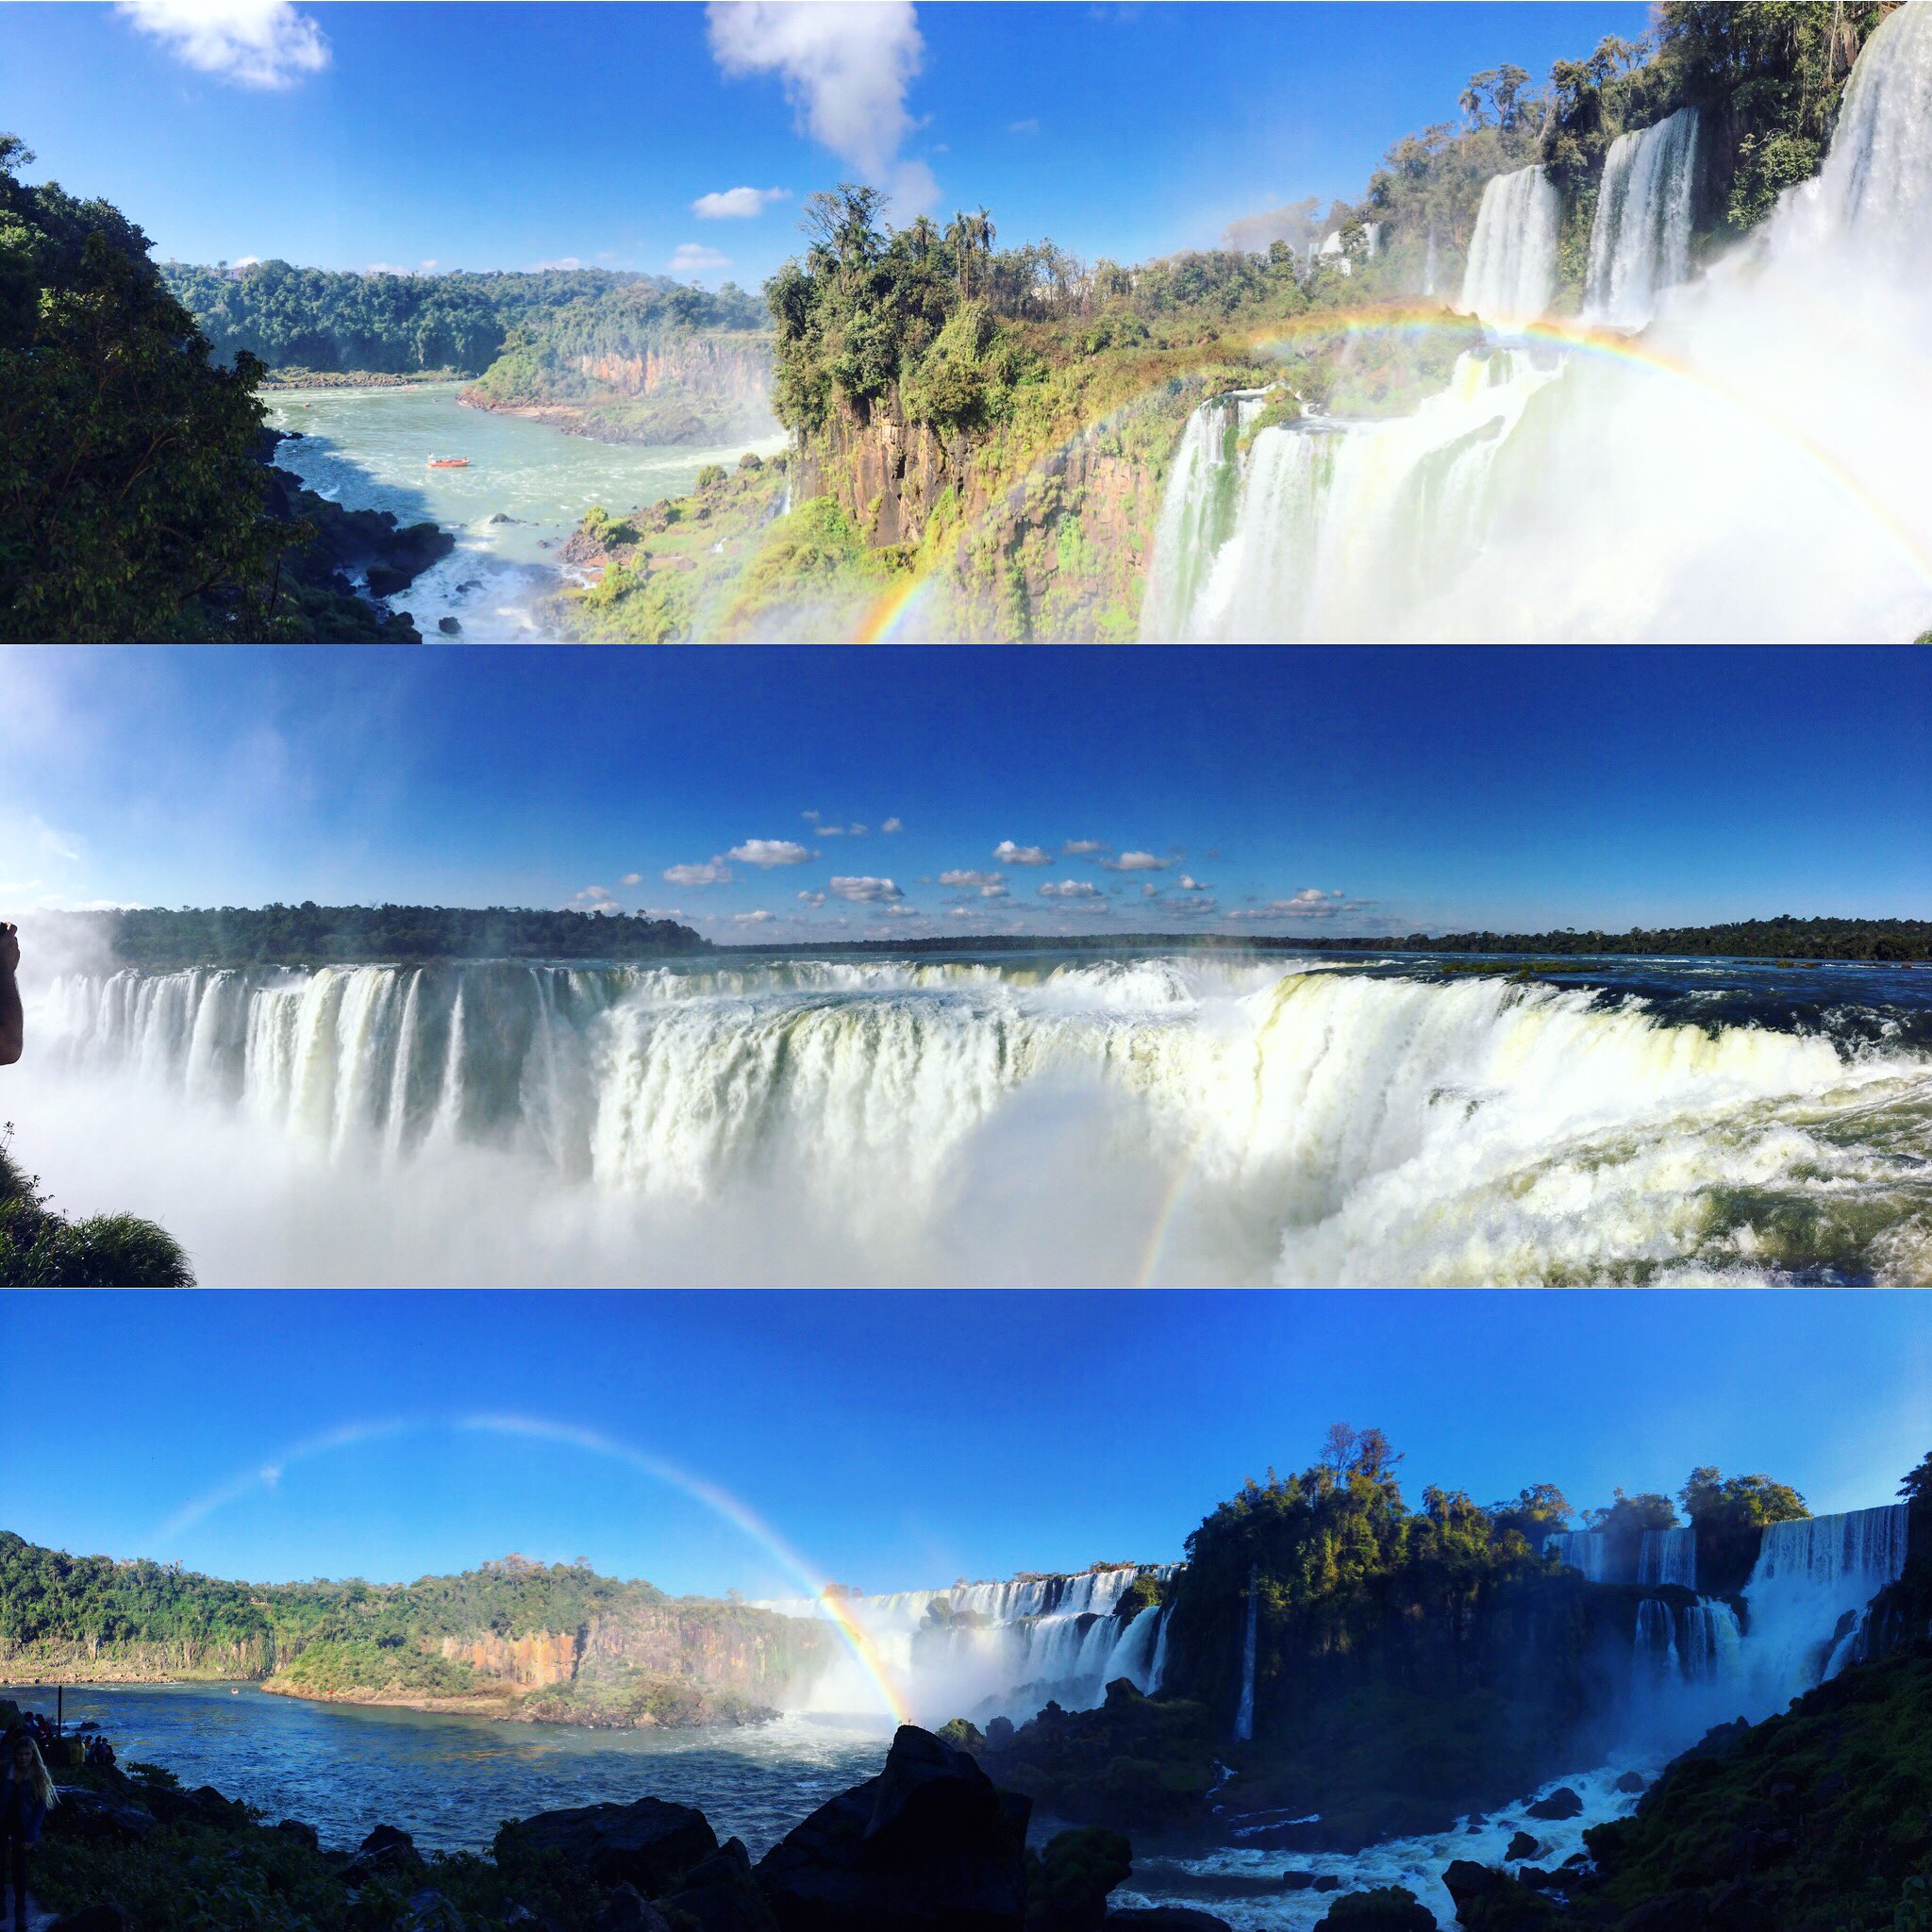 I tried picturing the beauty with some panos, but the real thing is so much more grandiose